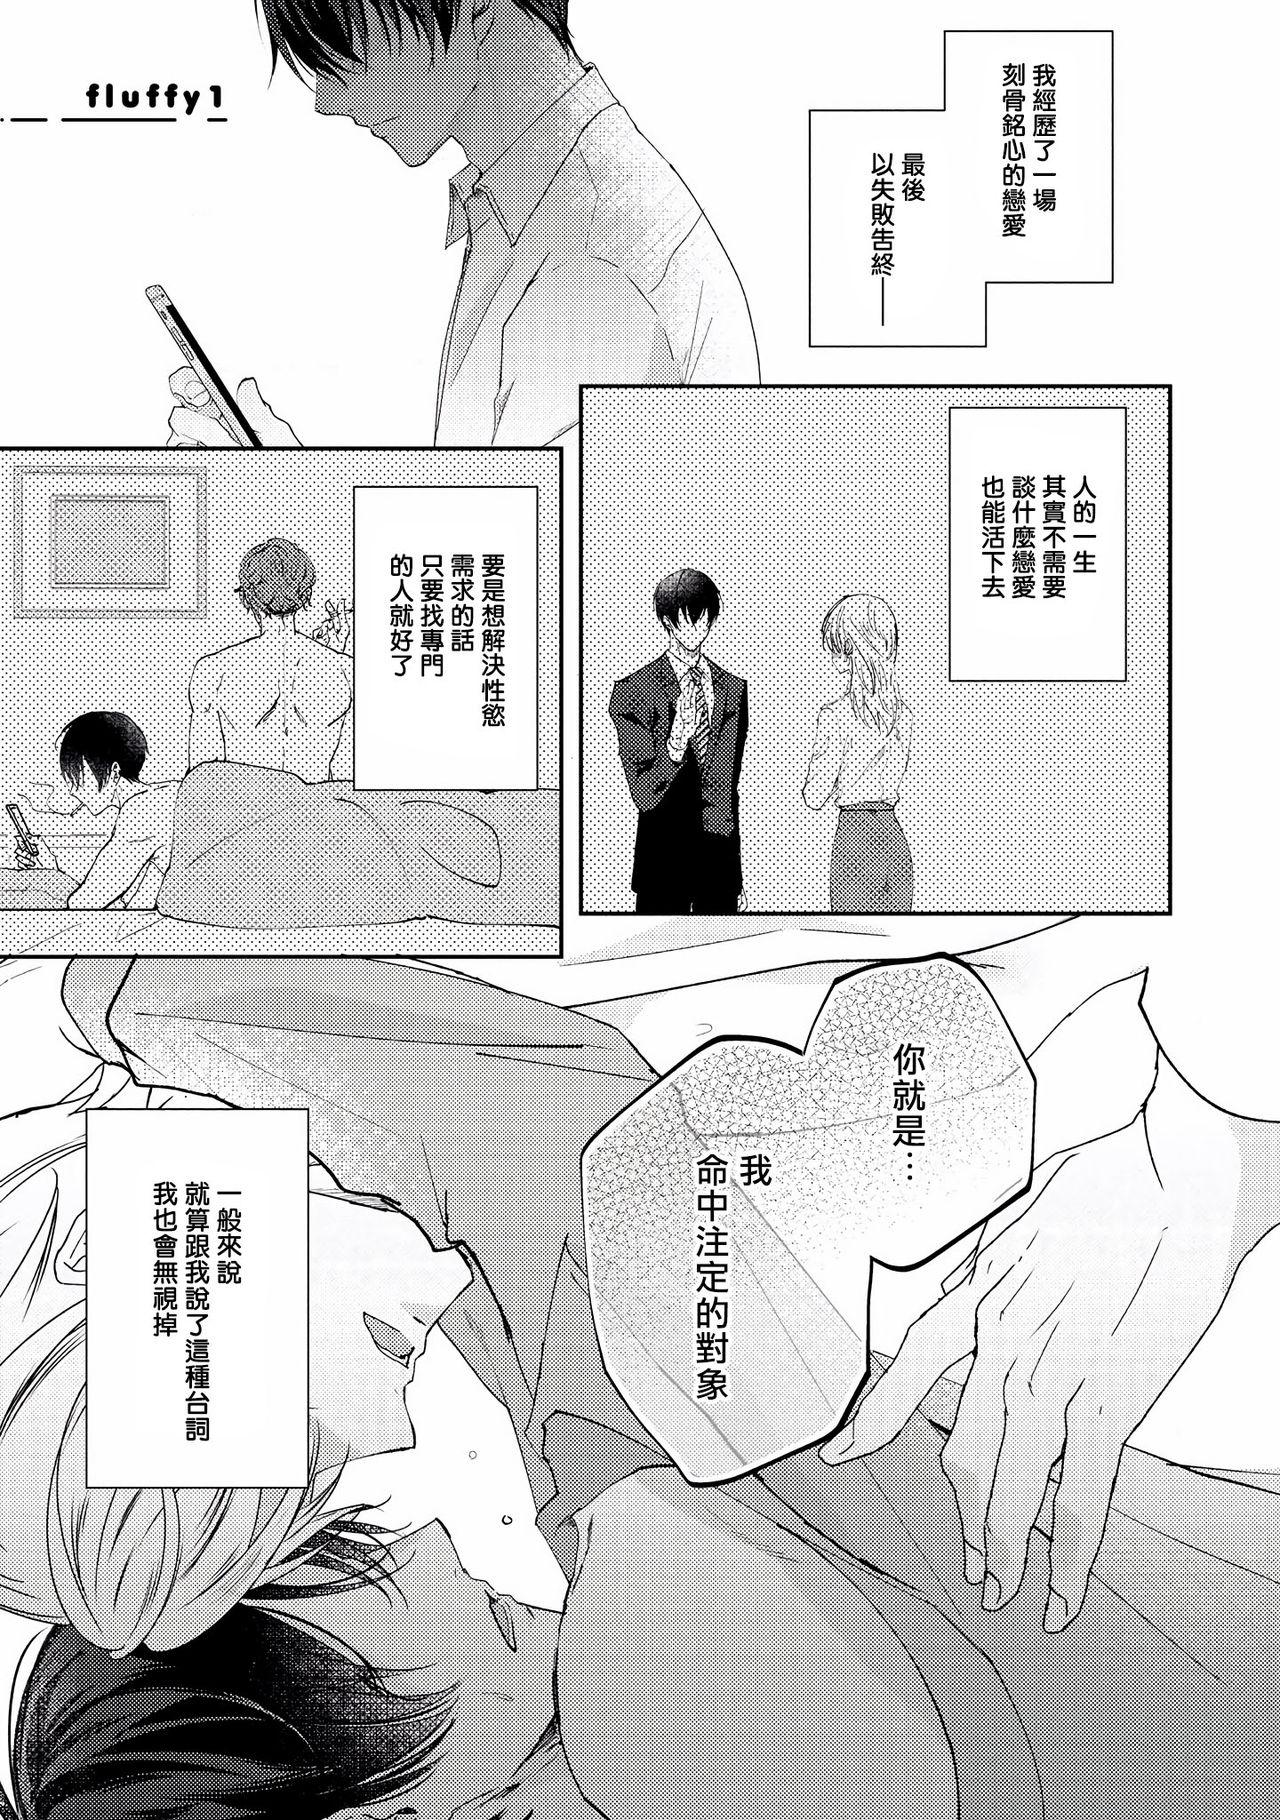 Outdoors Drastic f Romance | 激烈的F罗曼史 Ch. 1-5 Audition - Page 5